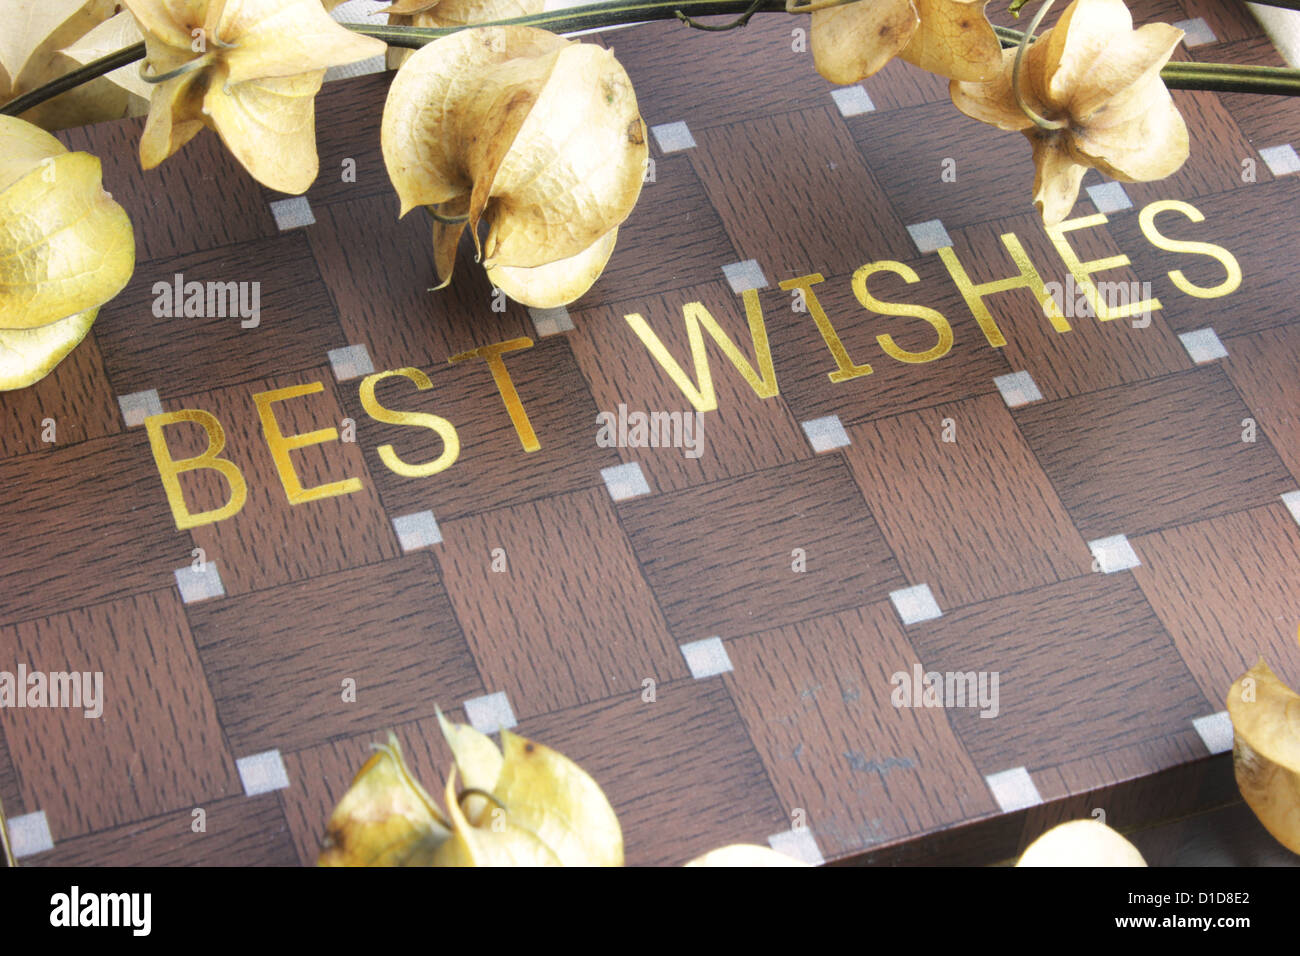 Best Wishes Stock Photo